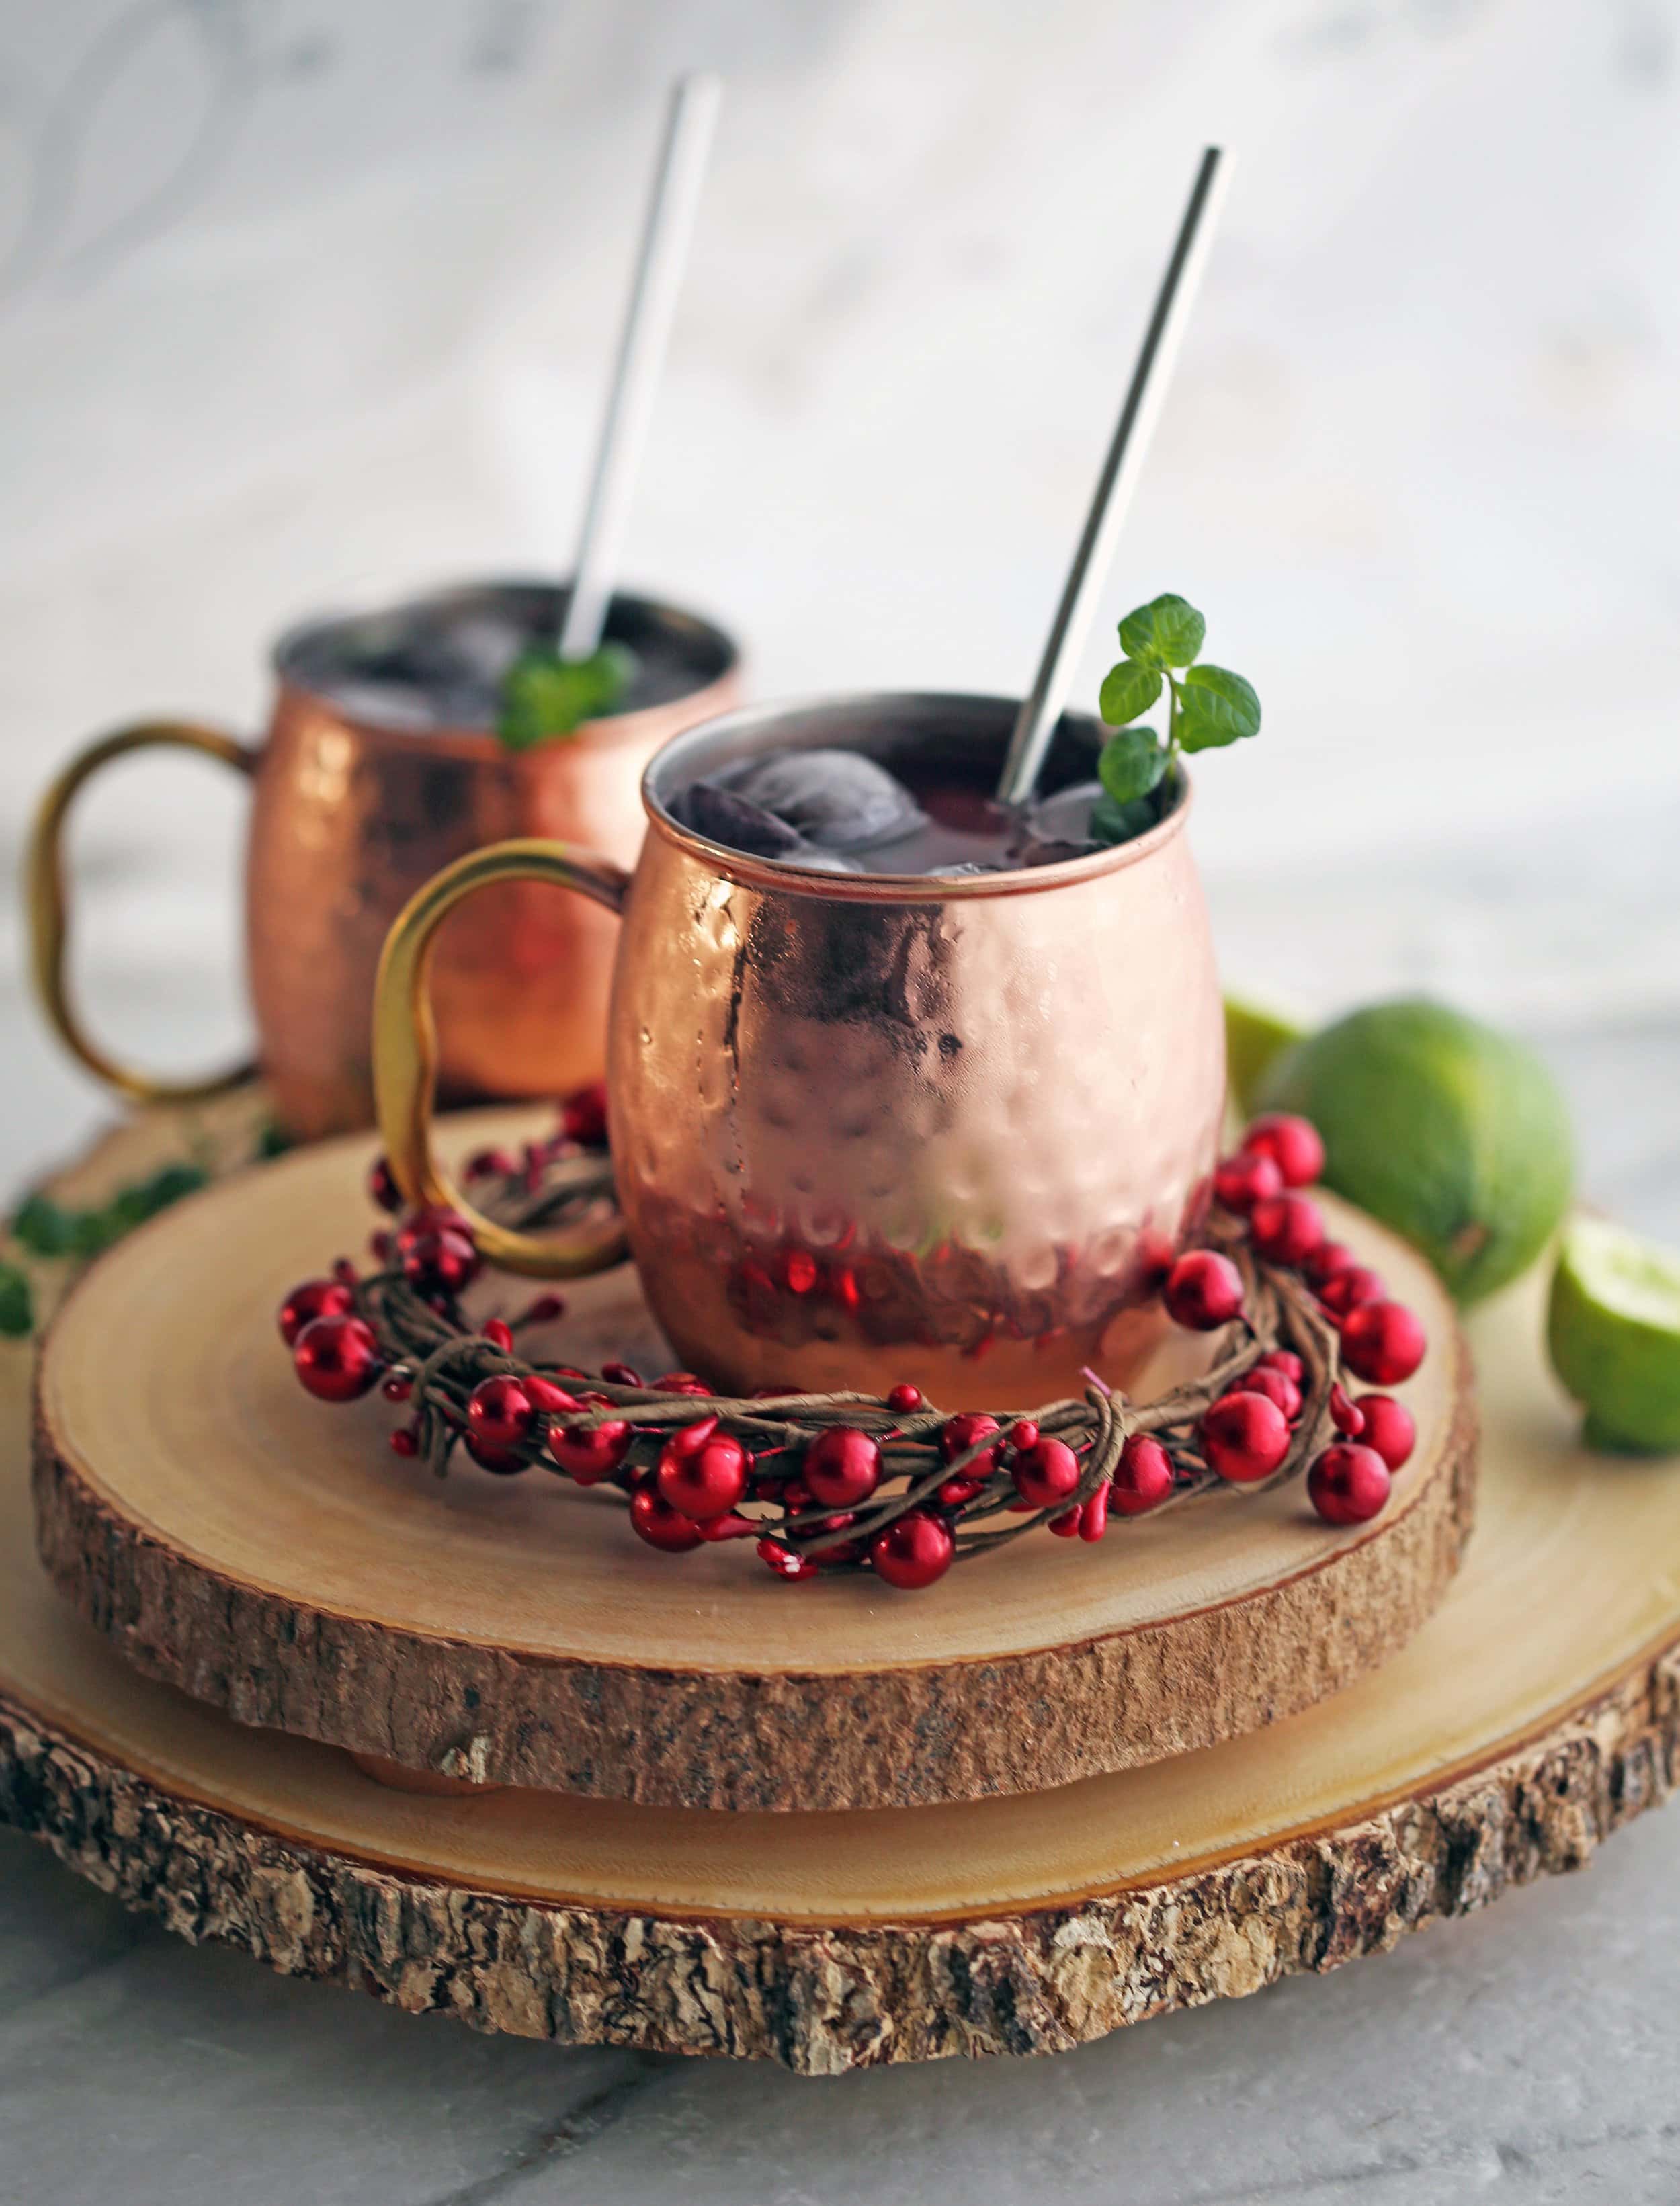 Two Pomegranate Honey Moscow Mule cocktails in copper mugs on wood slabs.